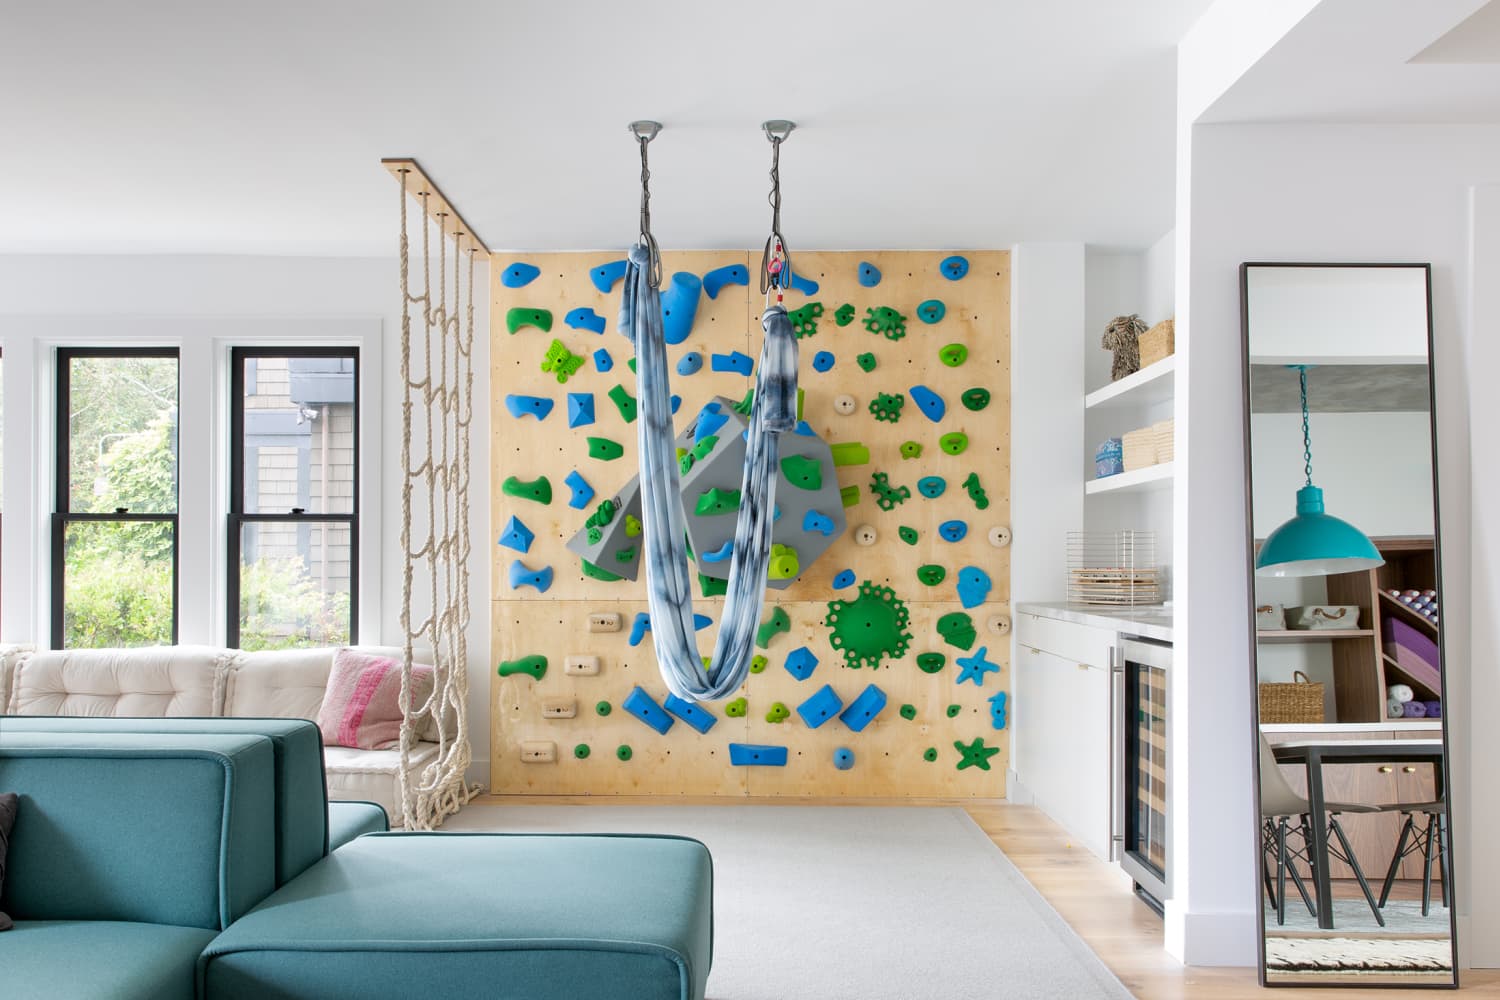 The 10 Best Playrooms Designers Have Ever Created | Cubby